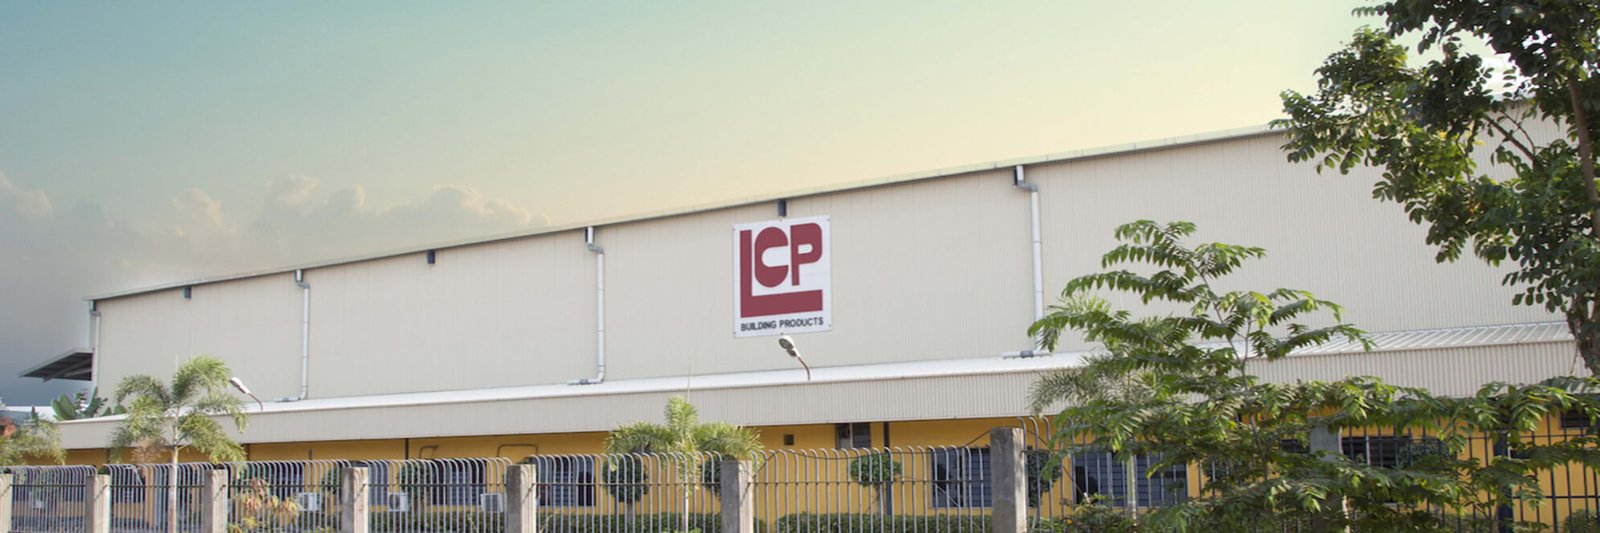 best roof sheet manufacturer in Jaipur: LCP Sliders